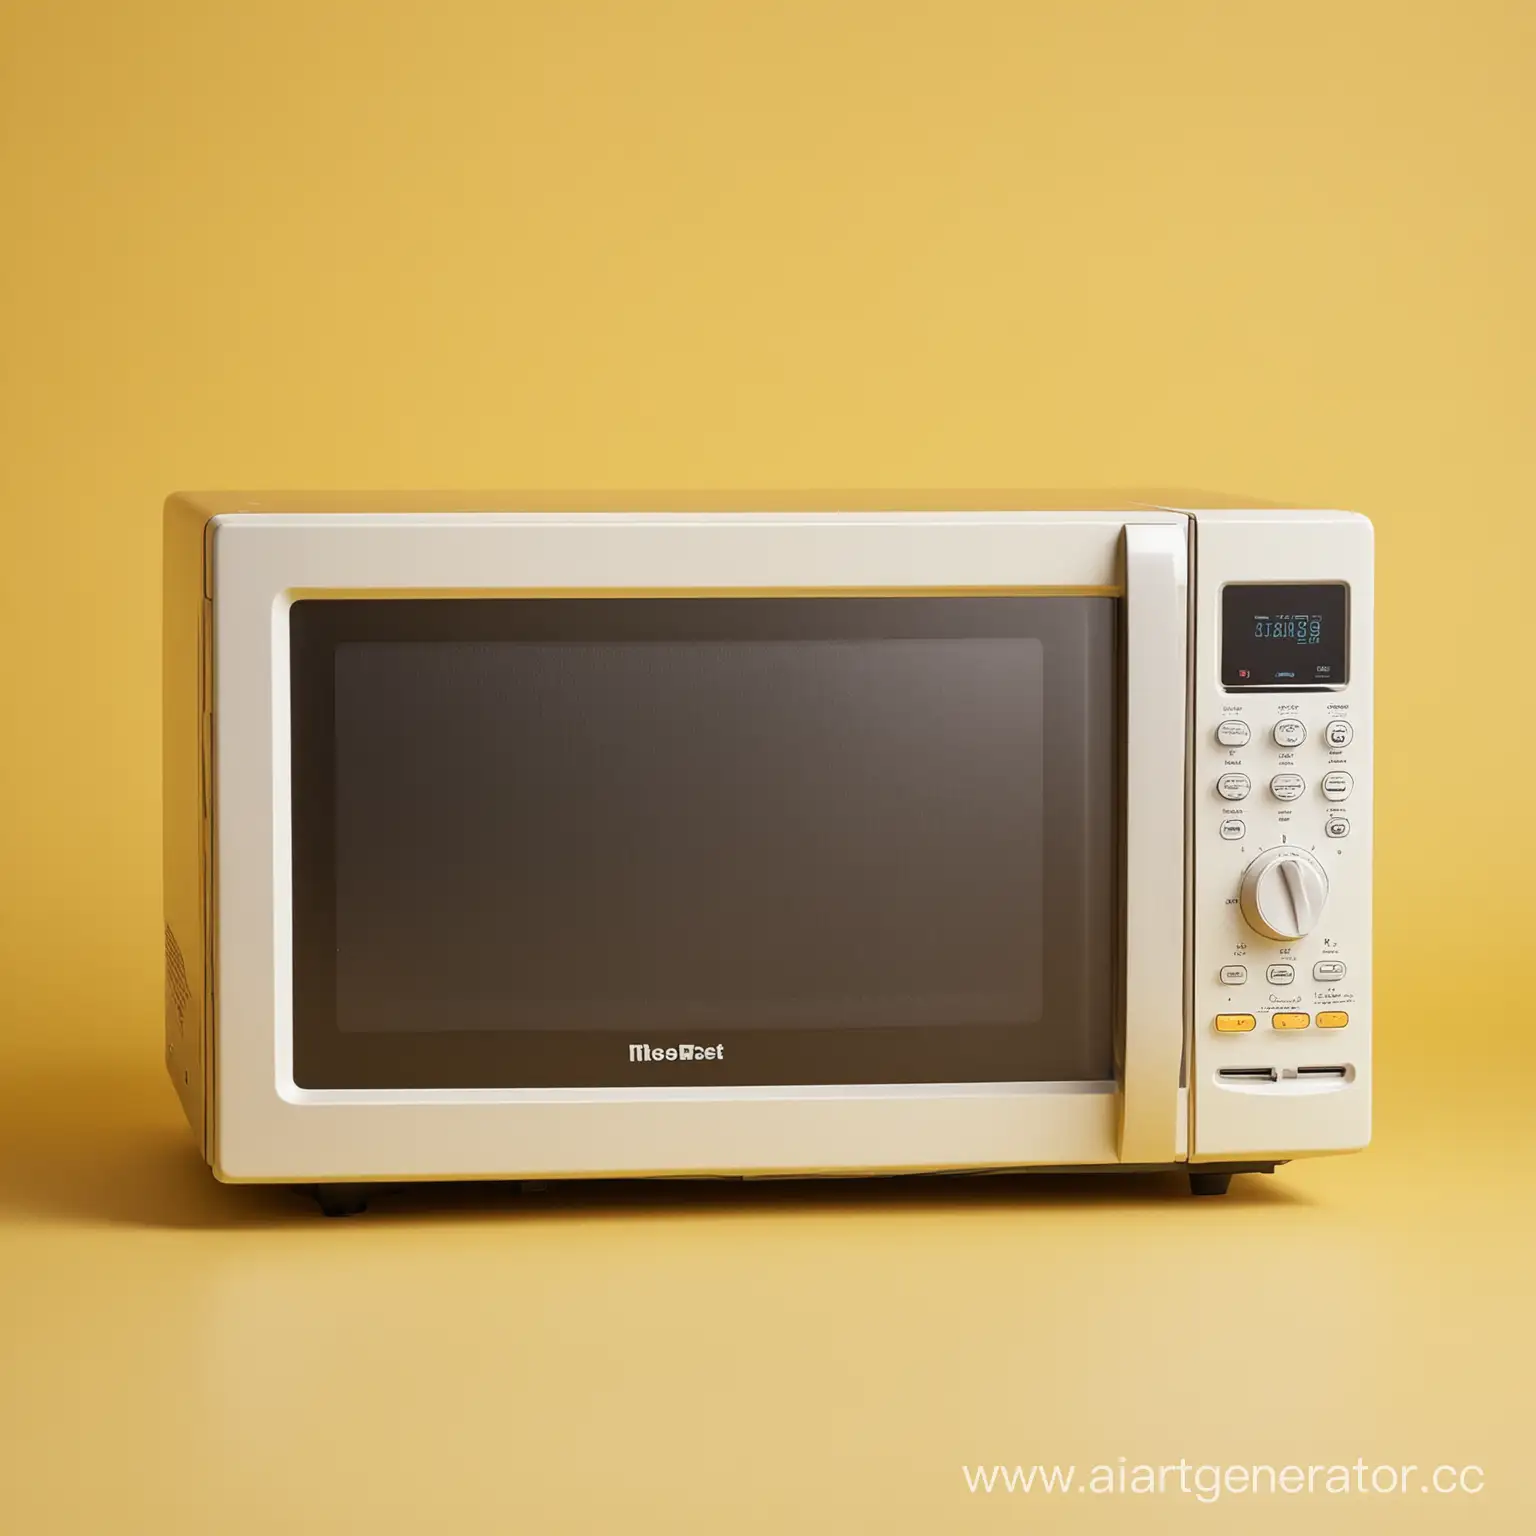 Microwave-Oven-on-Vibrant-Yellow-Background